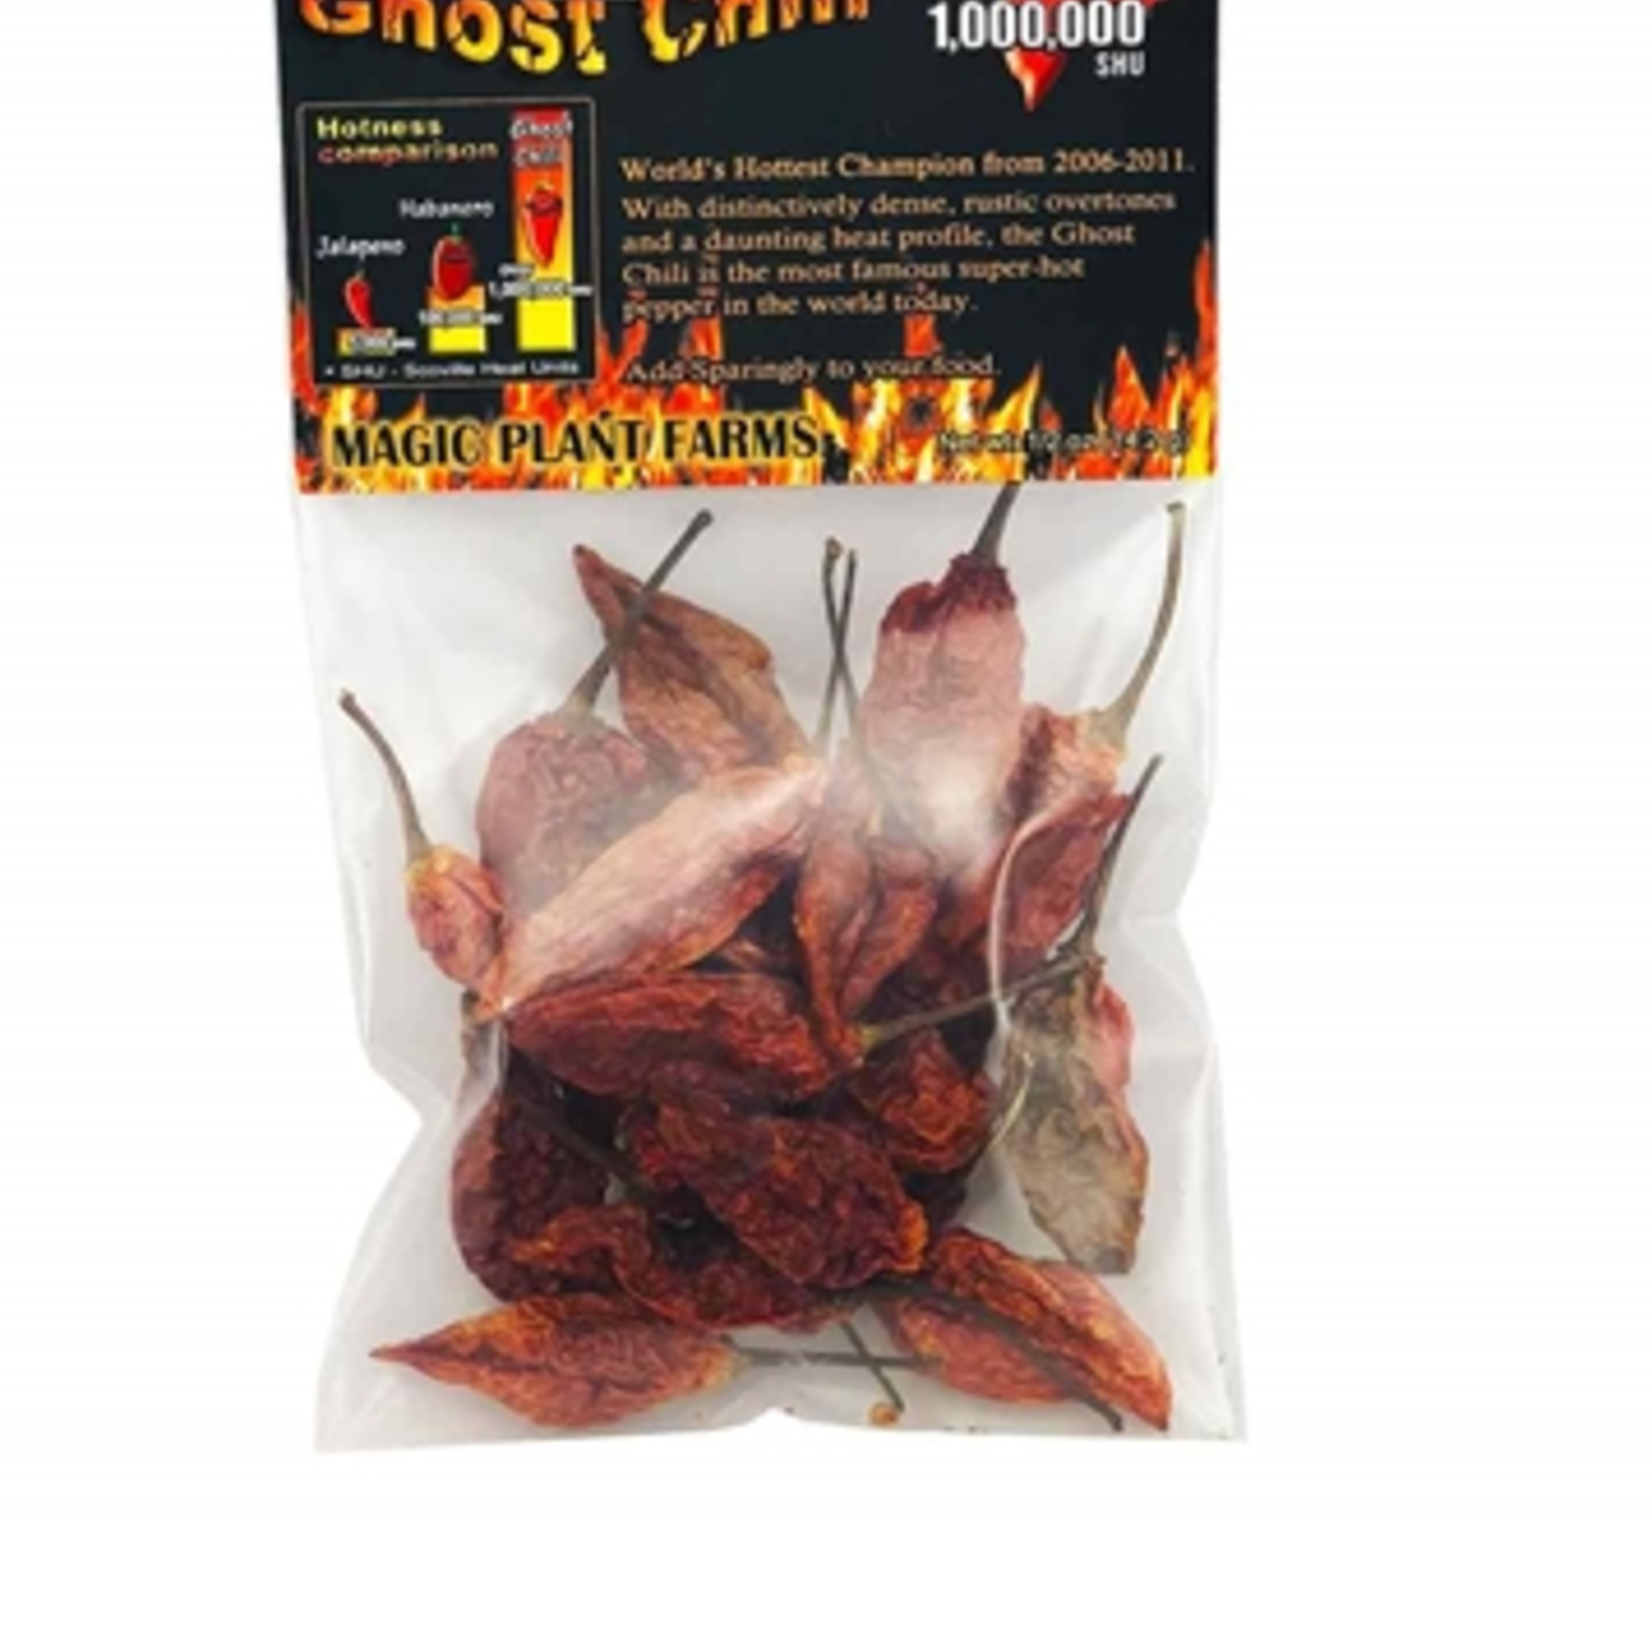 Hot Shots Distributing Dried Ghost Chilies